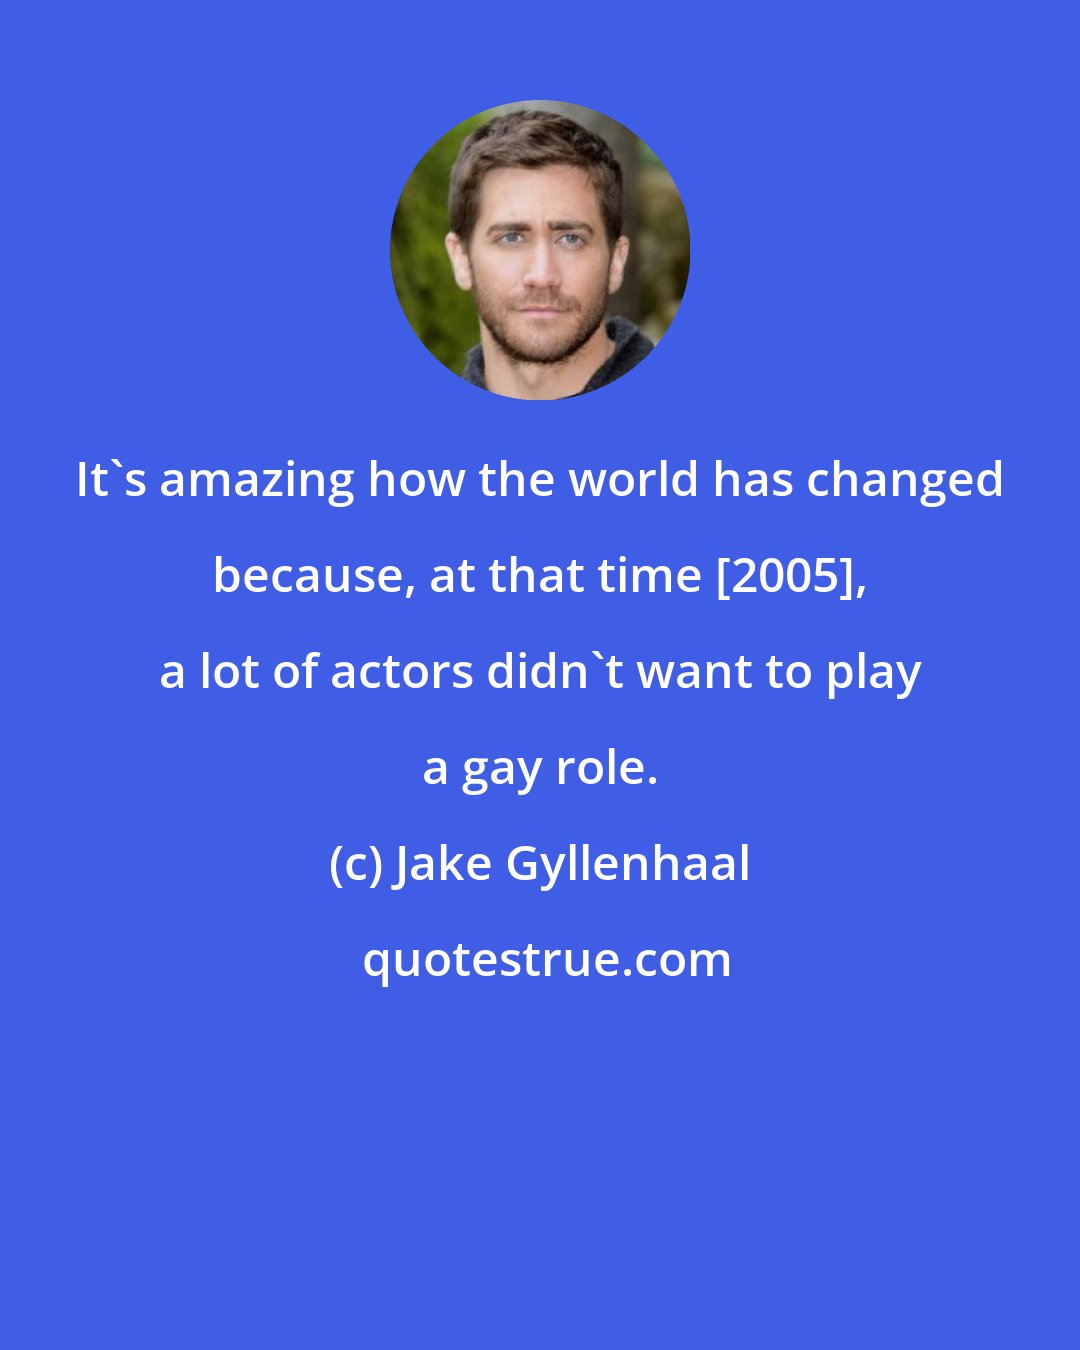 Jake Gyllenhaal: It's amazing how the world has changed because, at that time [2005], a lot of actors didn't want to play a gay role.